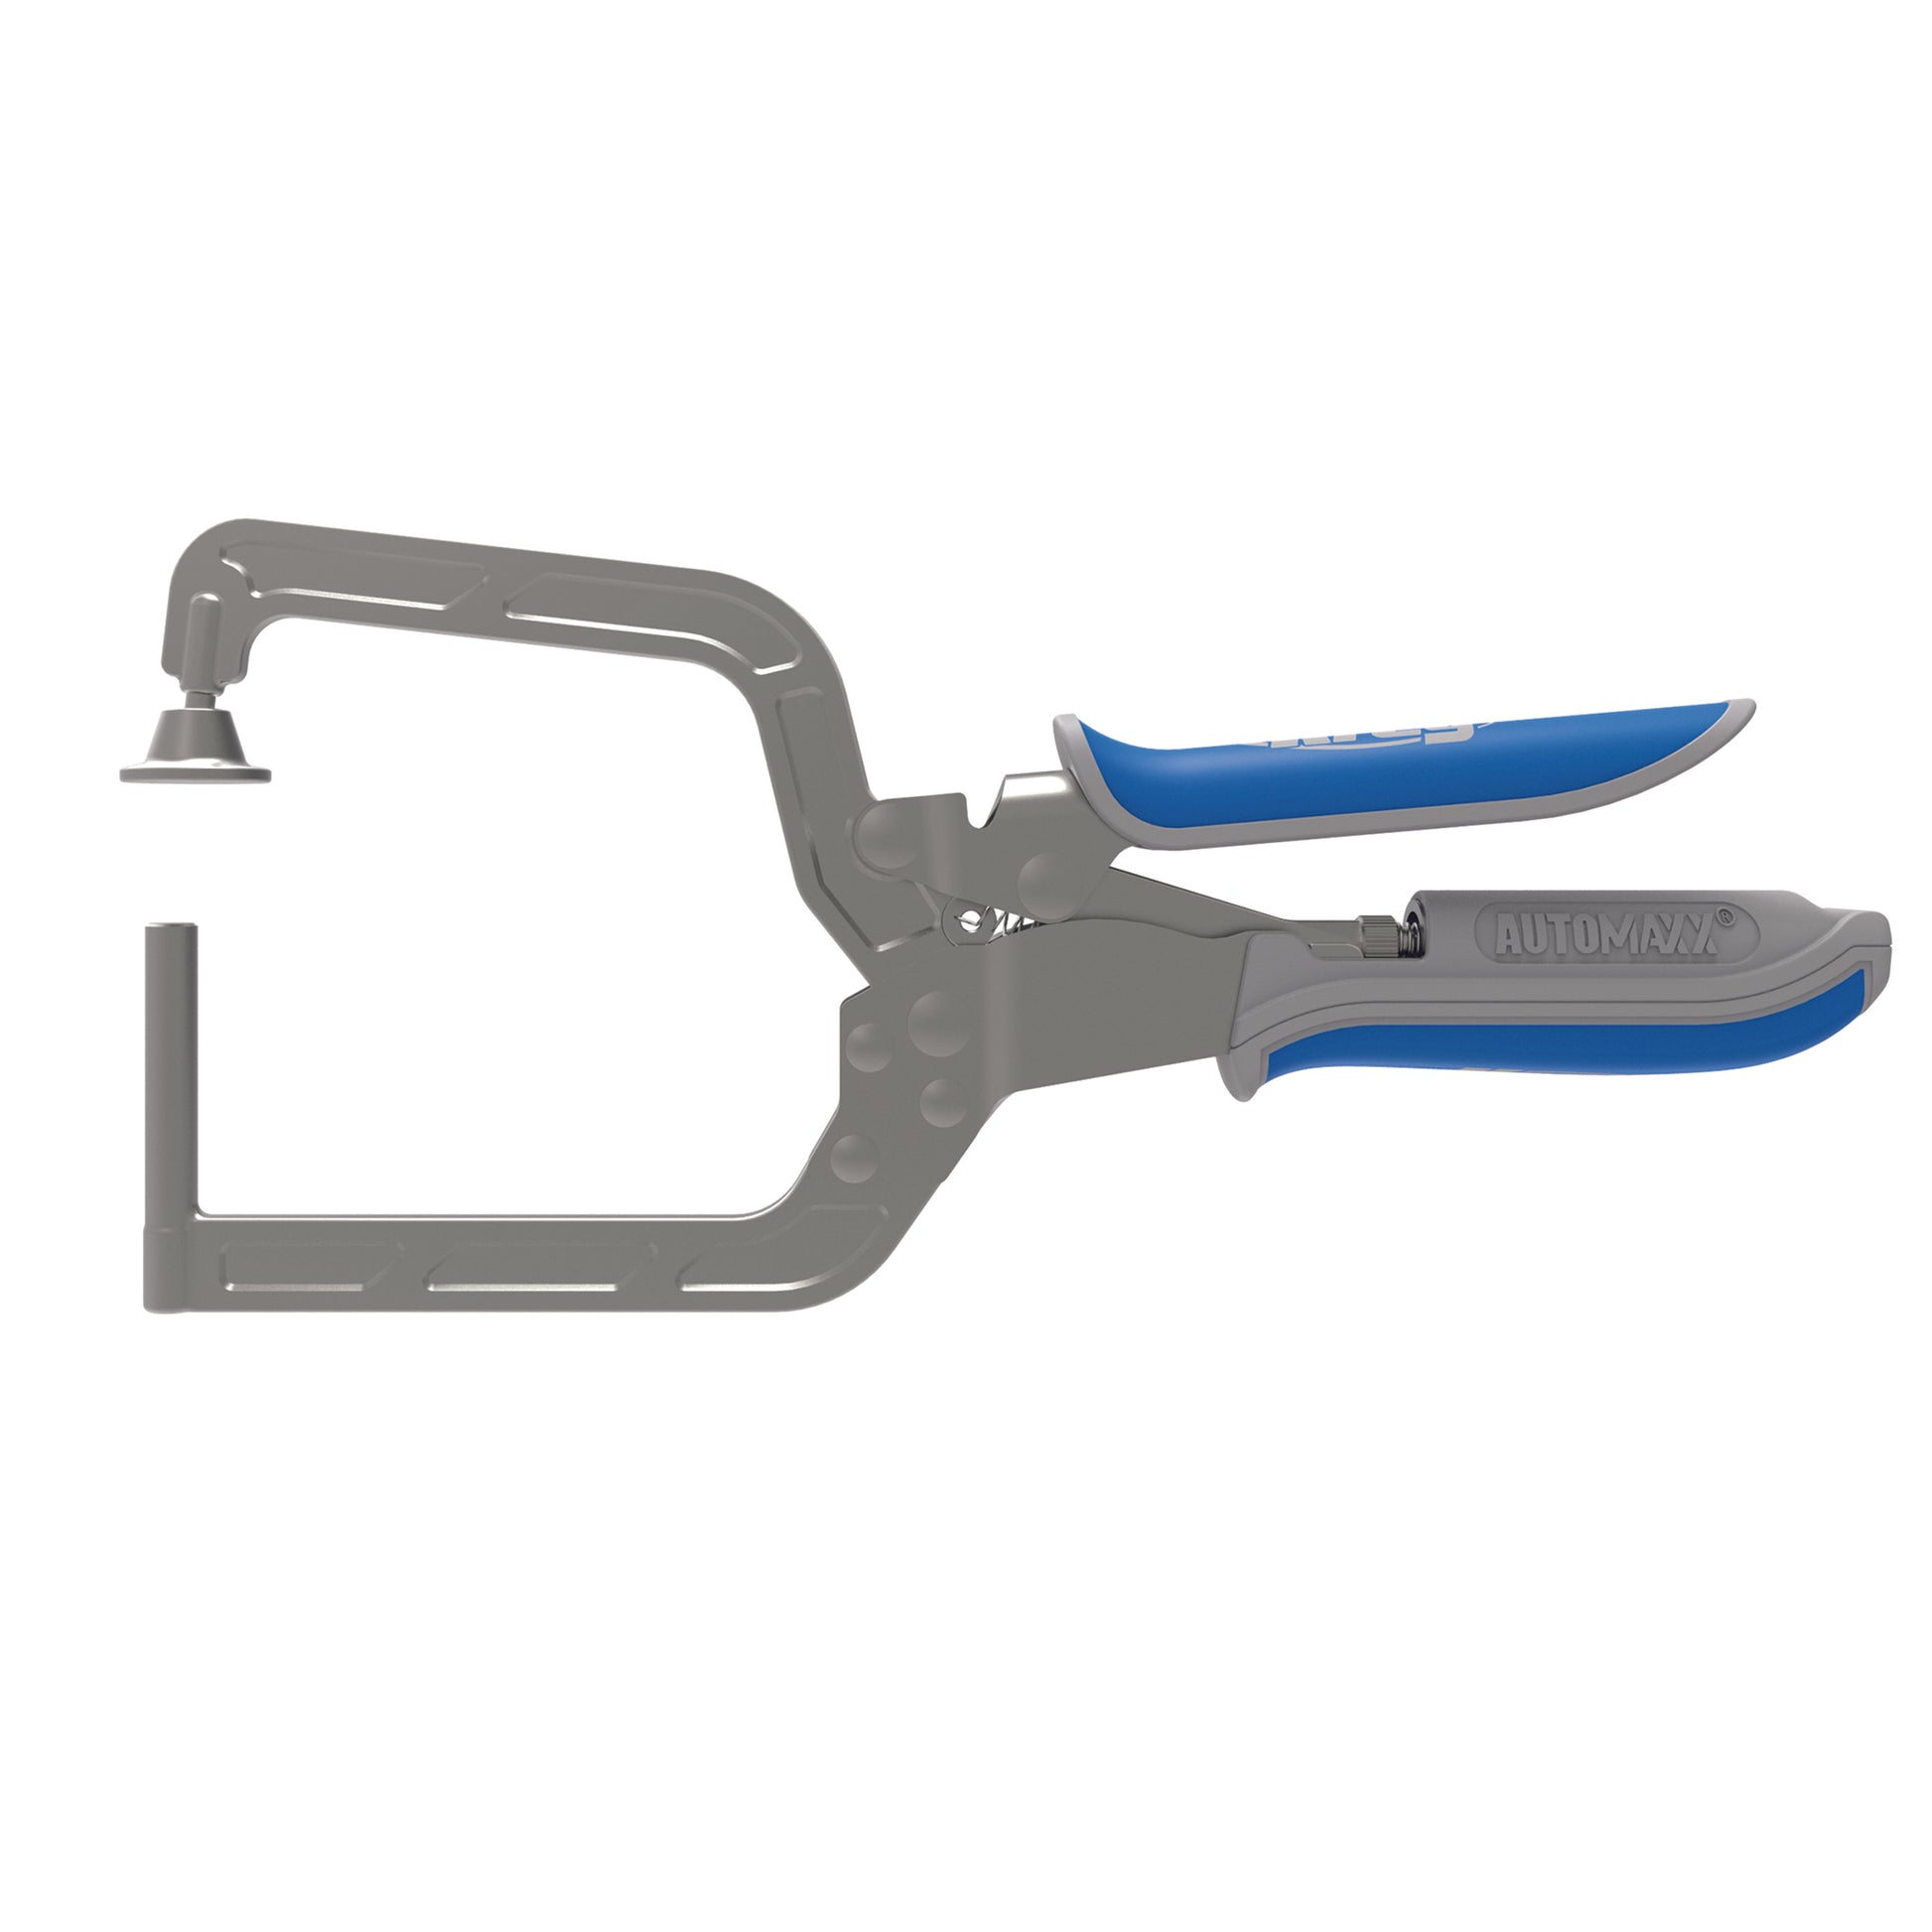 Generic Right Angle Clamp 4 Inch Corner Clamp For Woodworking Pocket Hole